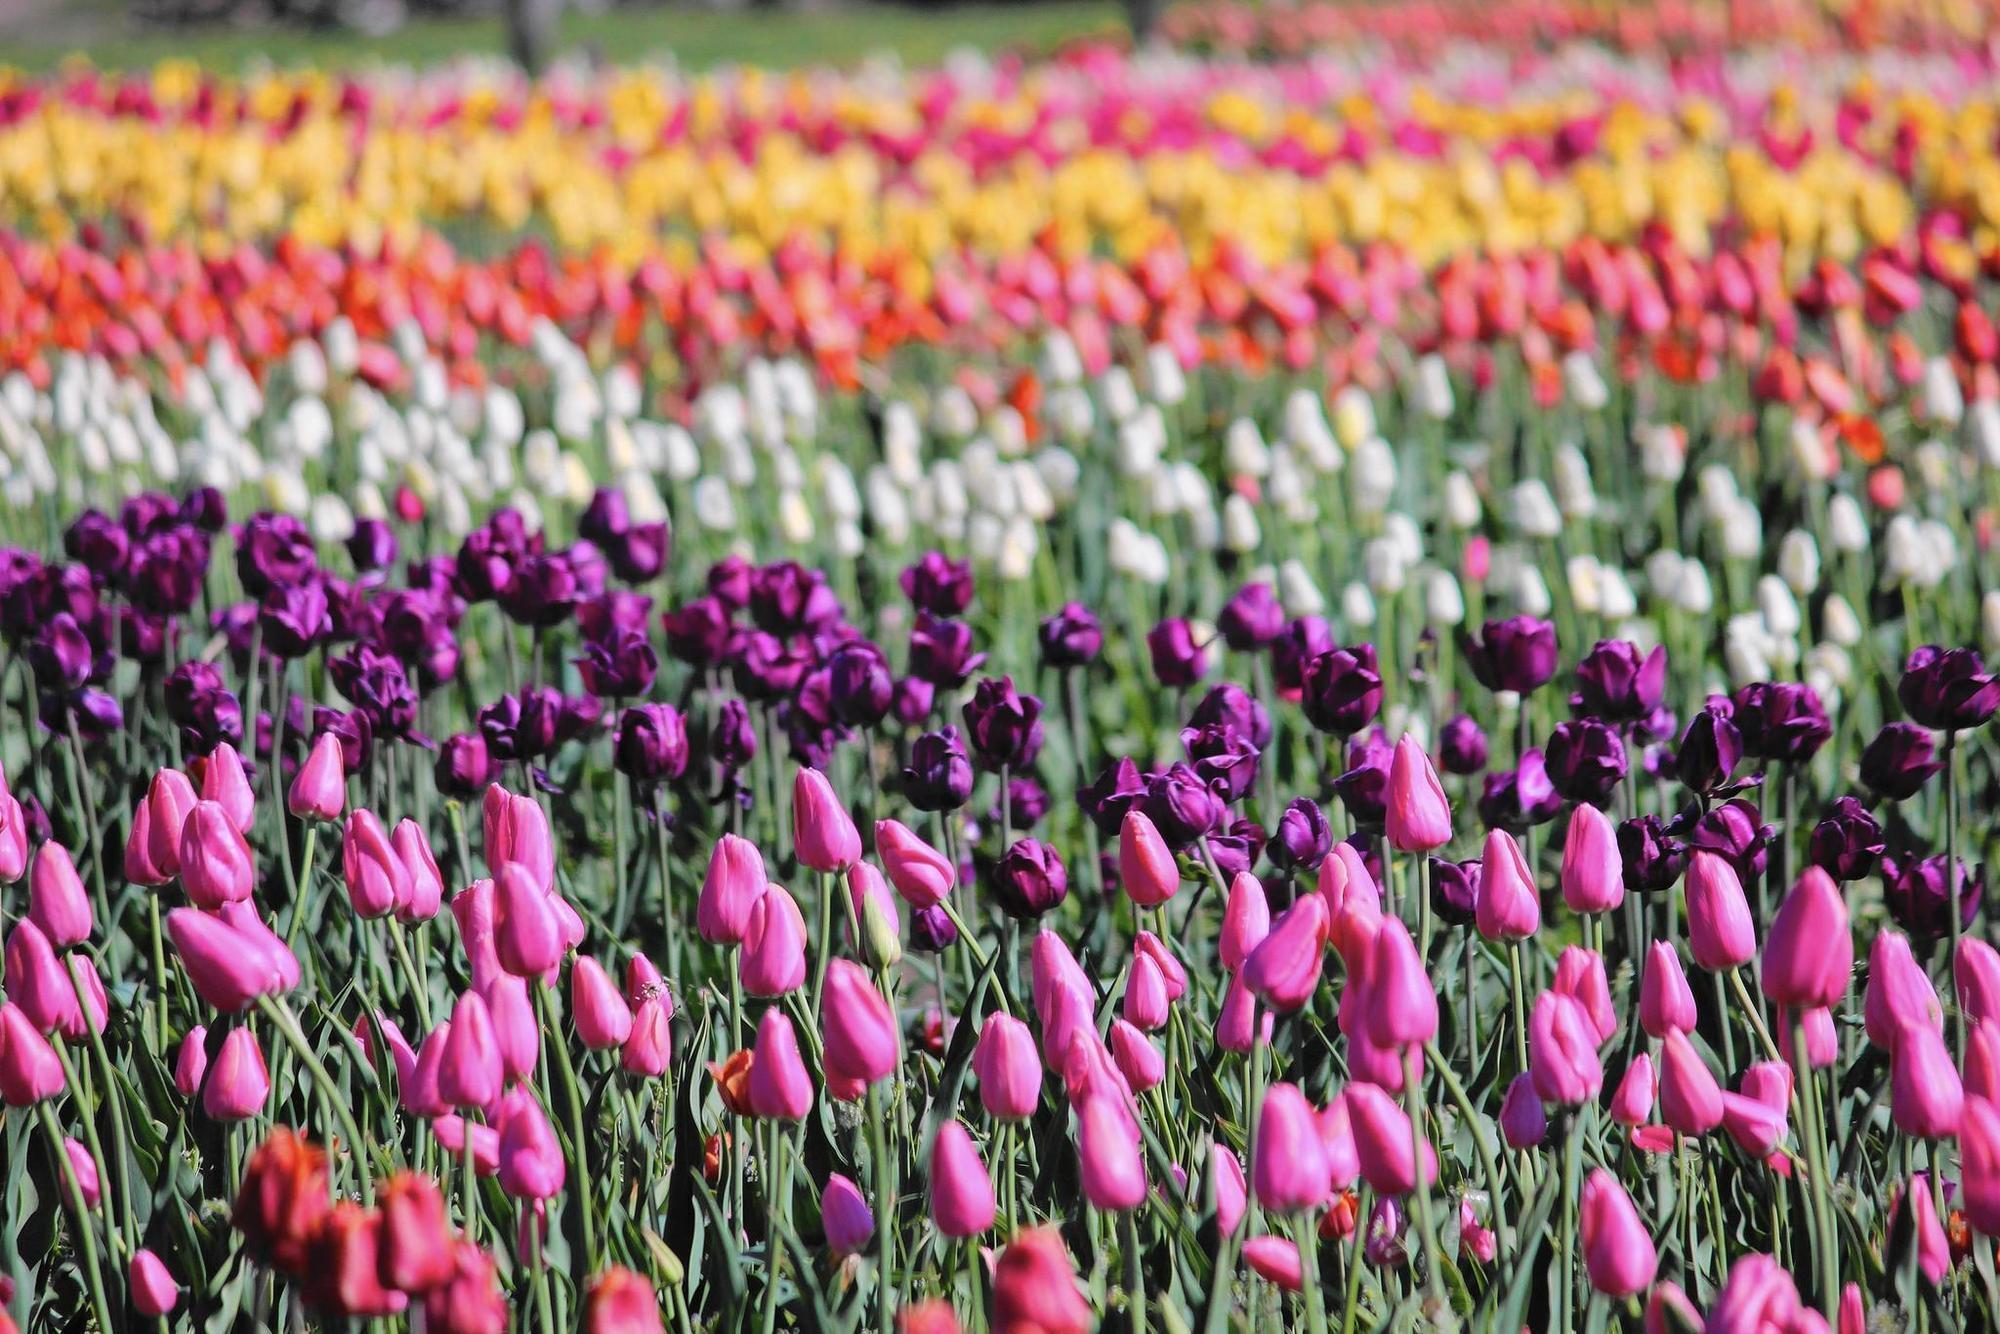 2 Midwest 'Tulip Time' festivals nod to towns' Dutch heritage ...